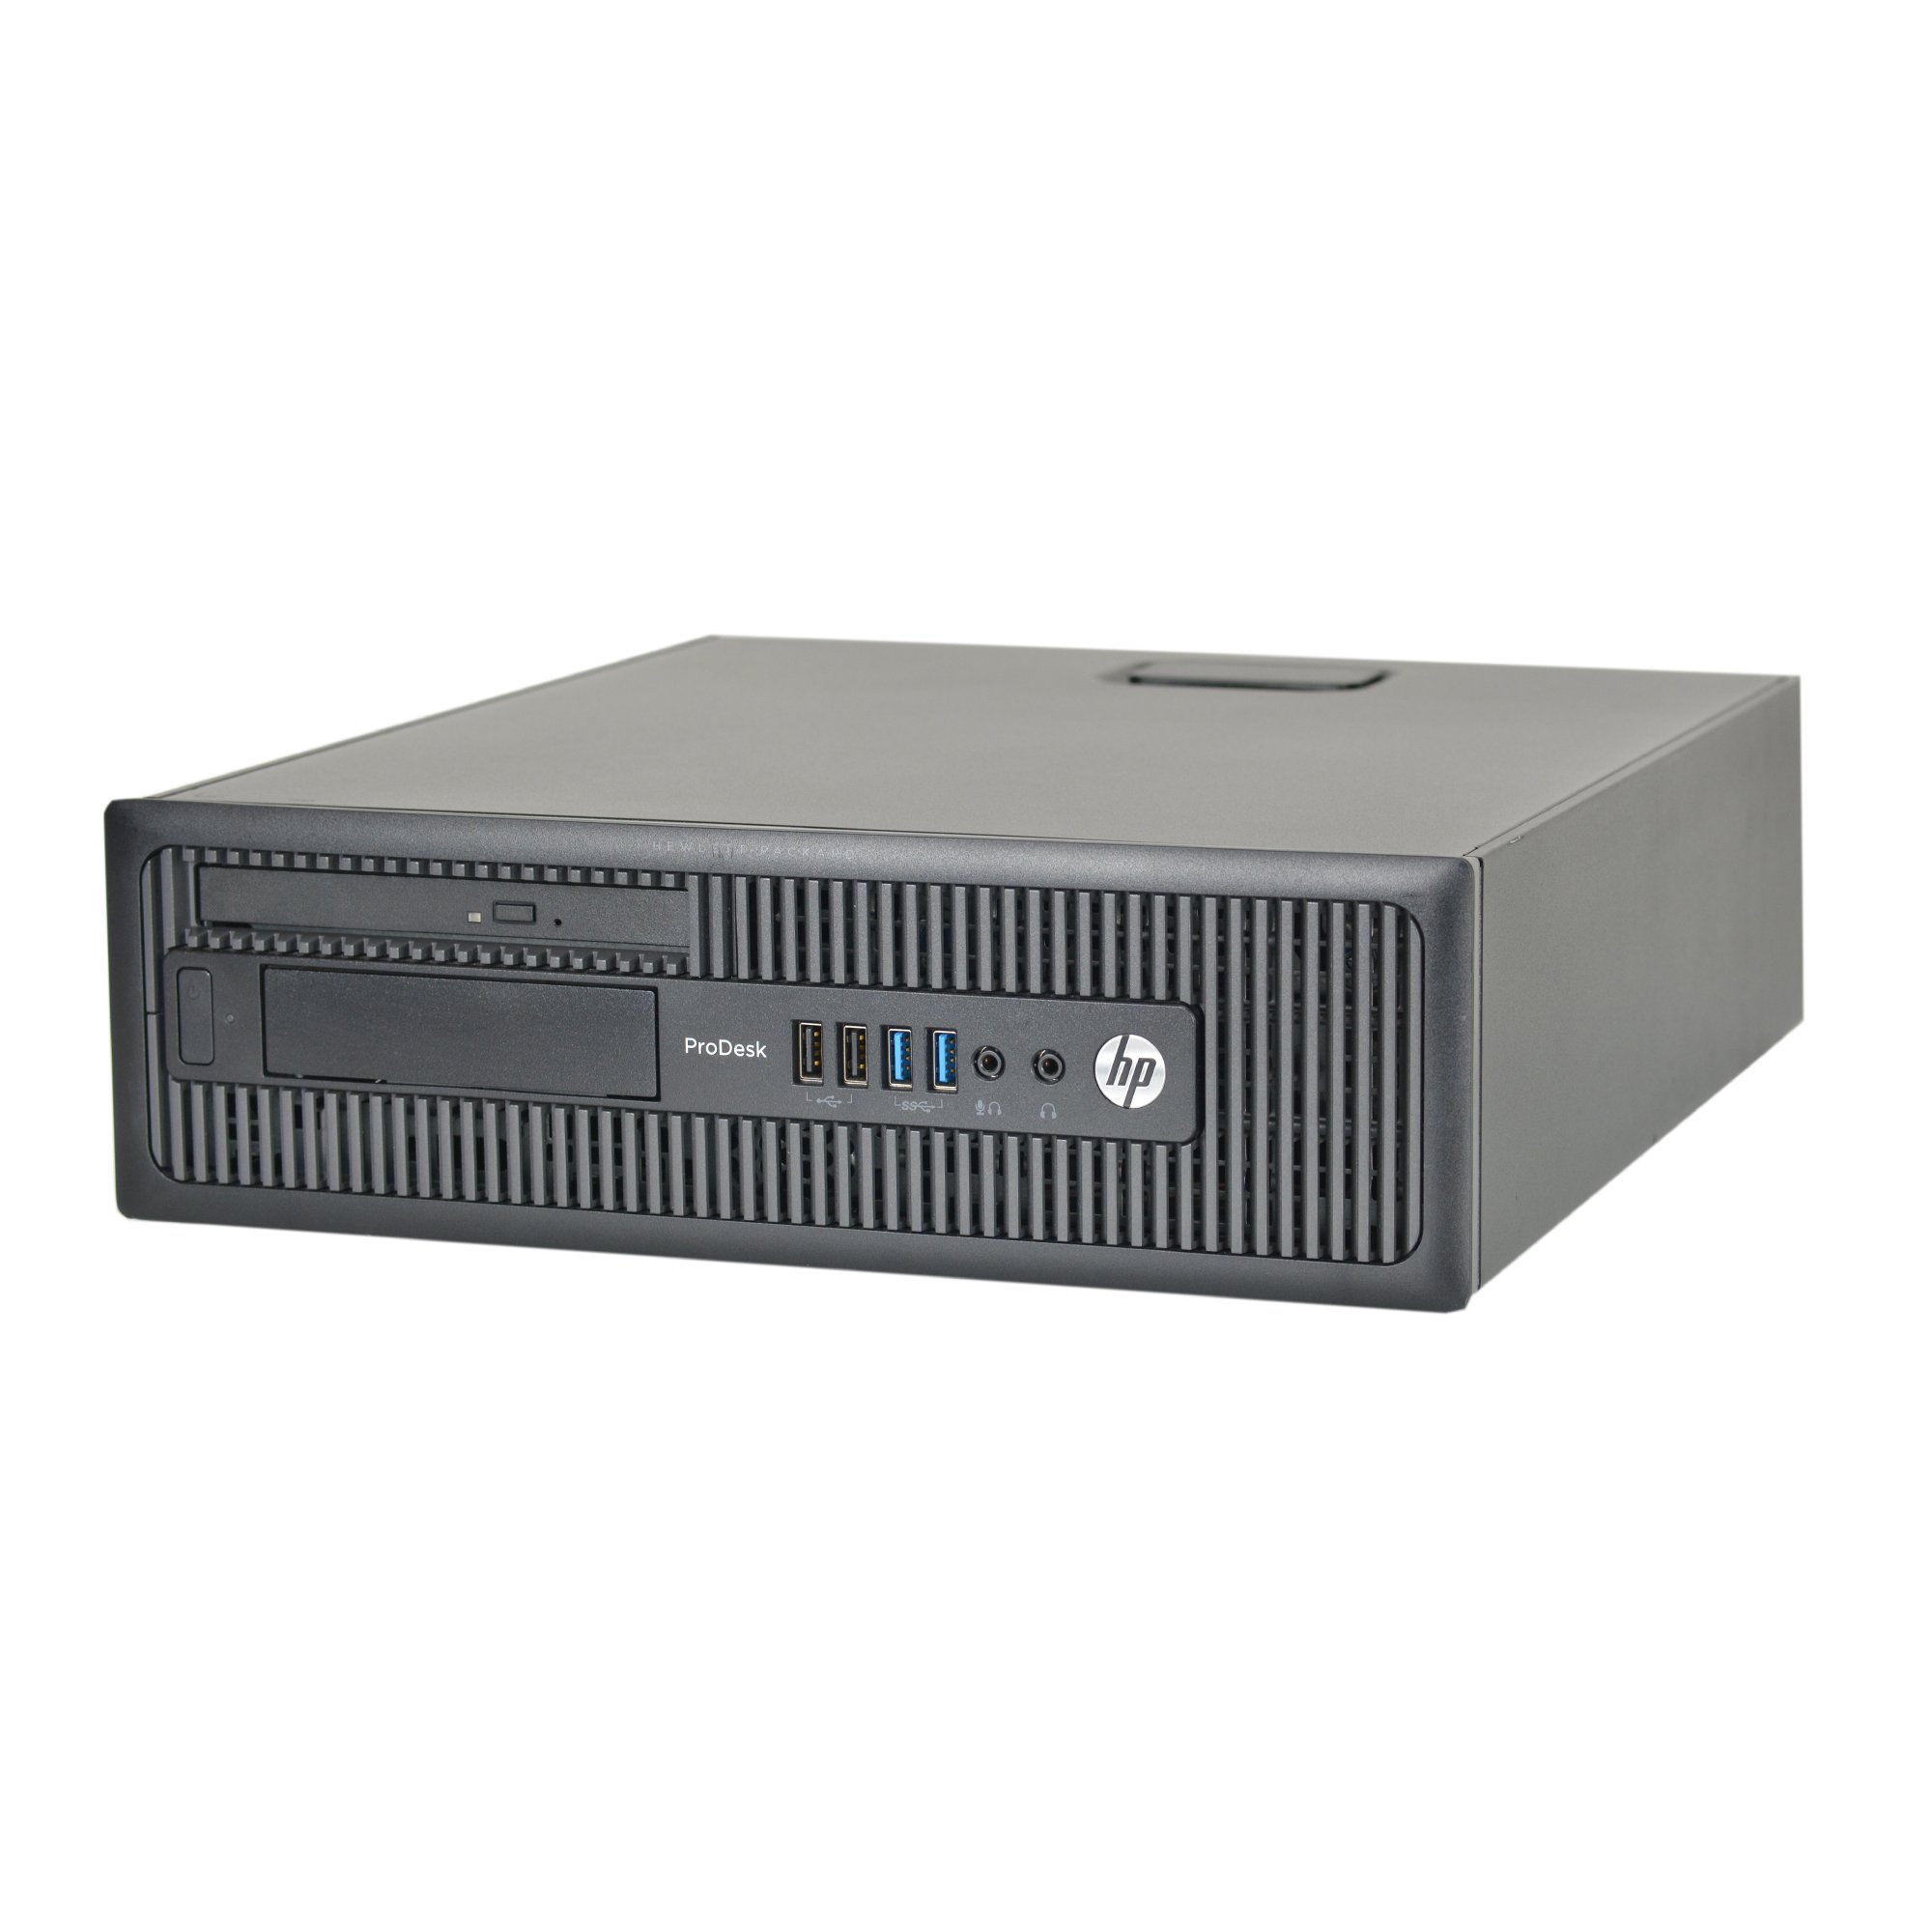 ProDesk 400 G1 Small Form Factor PC